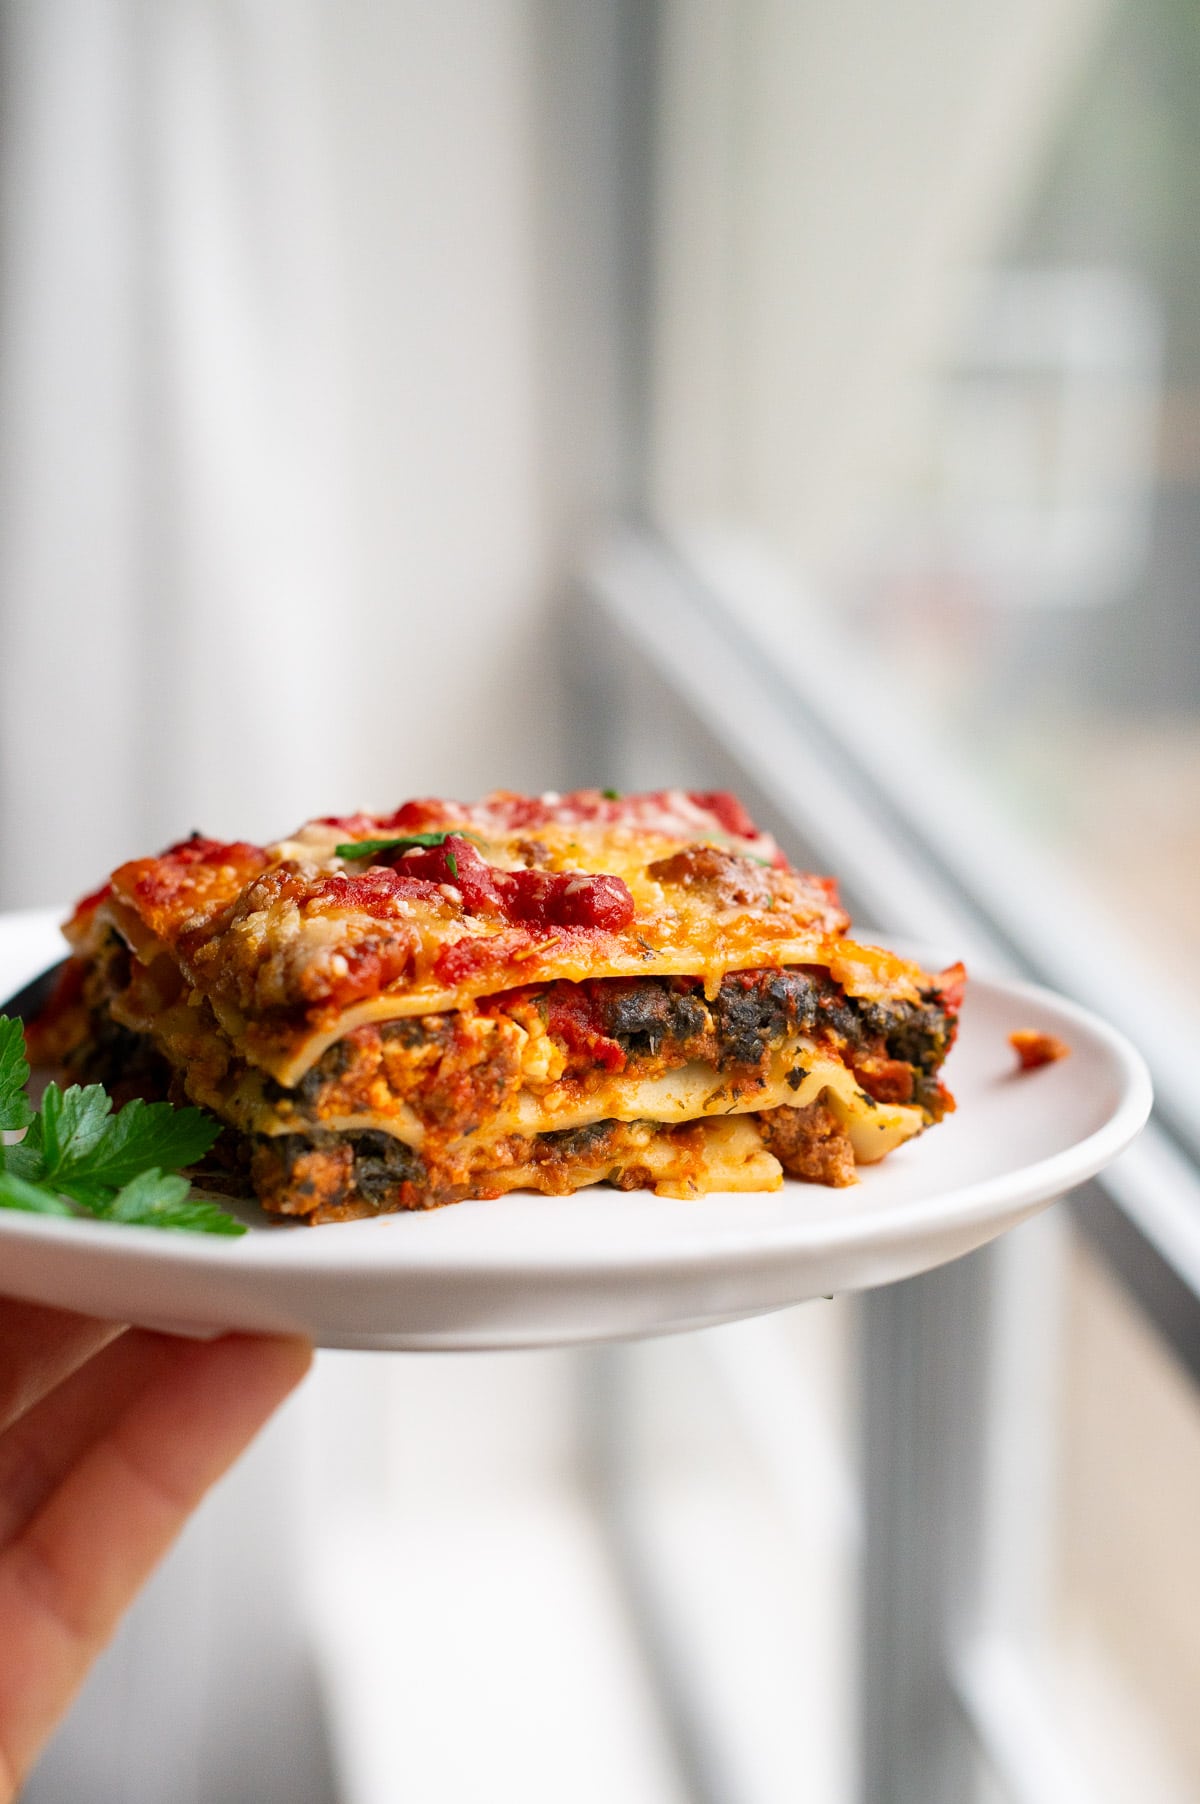 Person holding plate with a slice of lasagna recipe with cottage cheese.